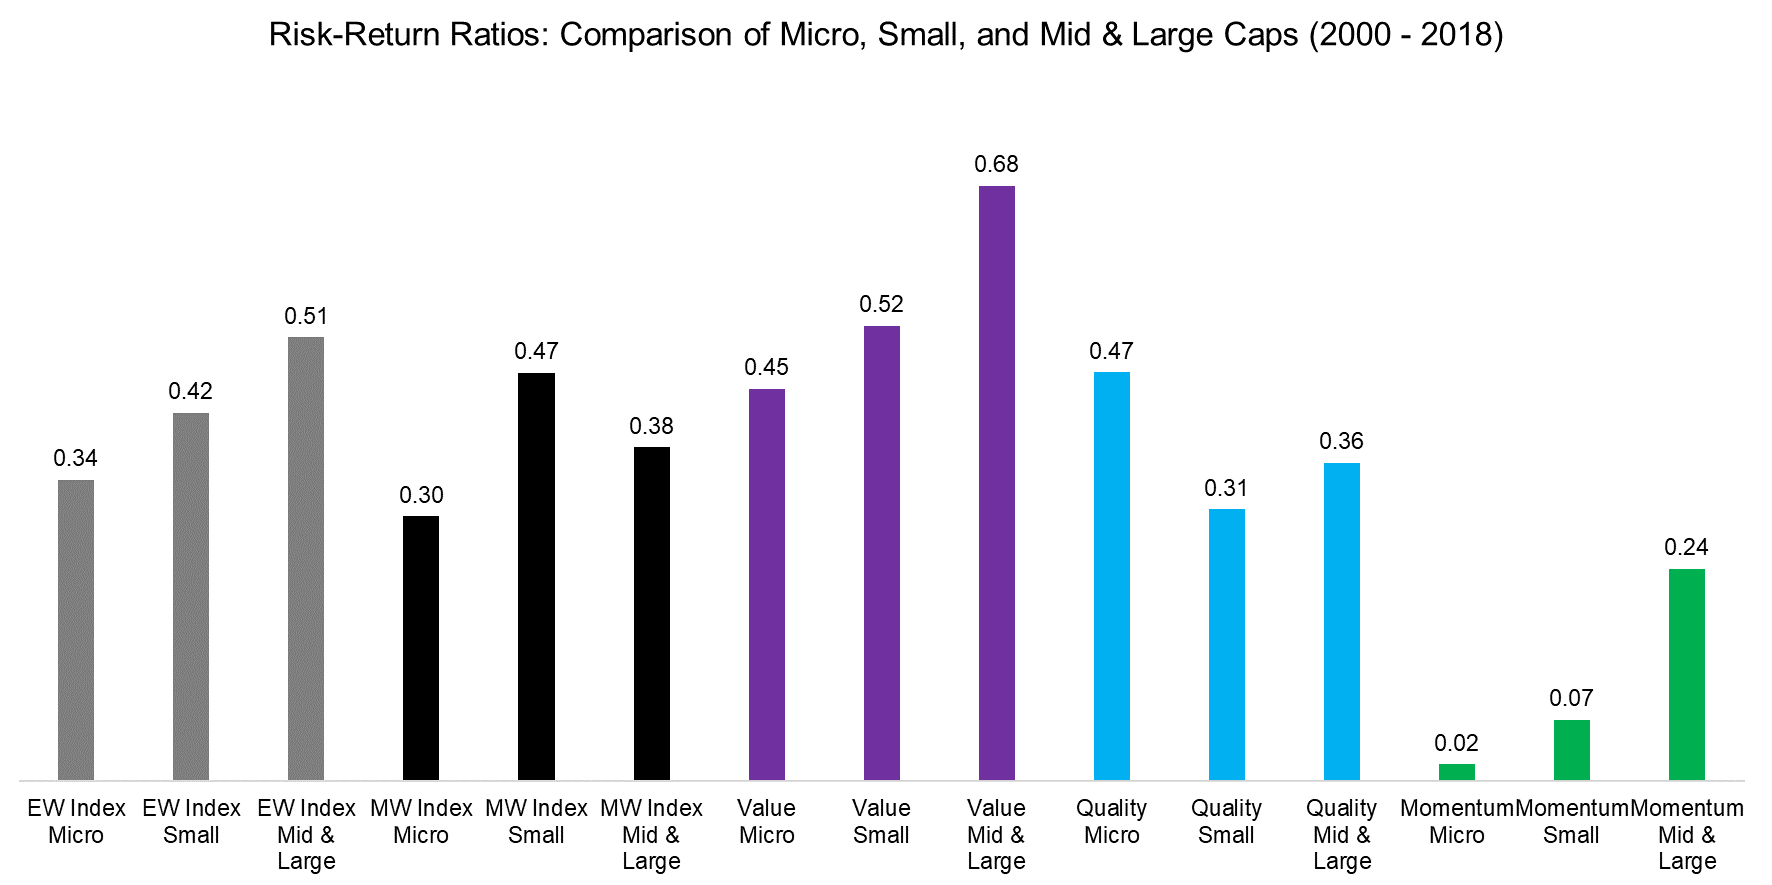 Risk-Return Ratios Comparison of Micro, Small, and Mid & Large Caps (2000 - 2018)i